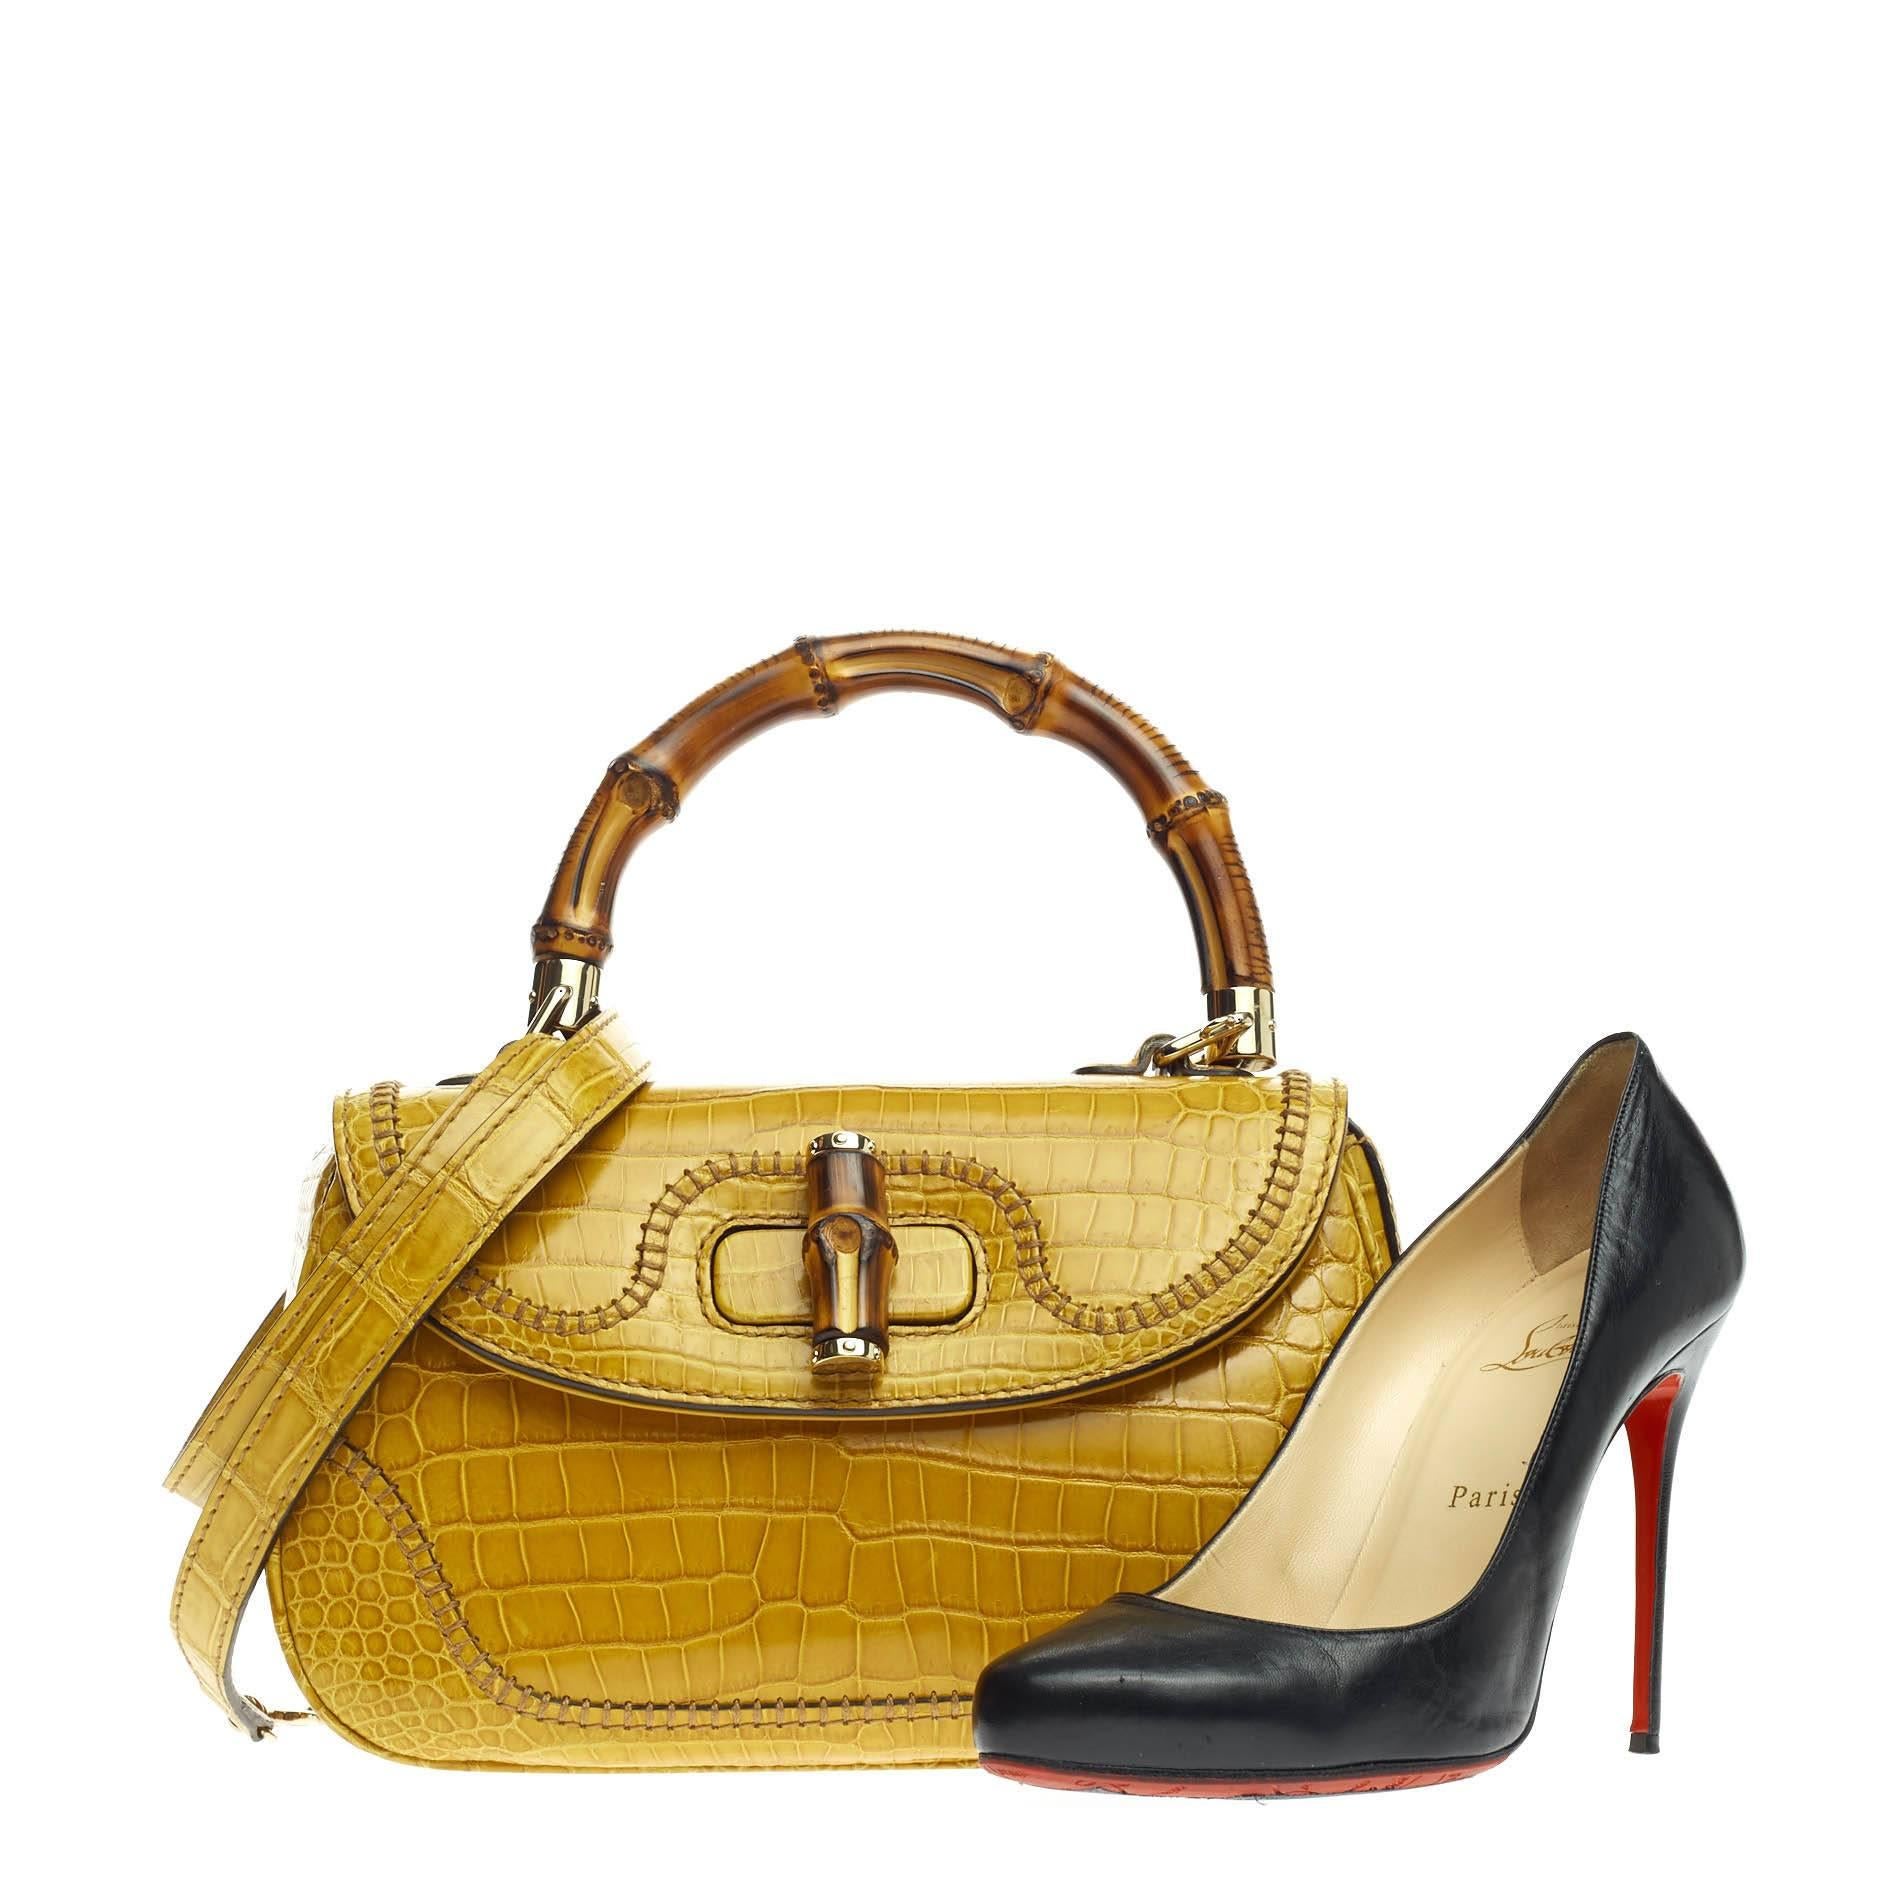 This authentic Gucci New Bamboo Convertible Top Handle Crocodile Medium is unmistakably a classic and timeless Gucci design made for avid fashionistas. Crafted in genuine mustard yellow crocodile skin, this re-imagined iconic bag features a bamboo